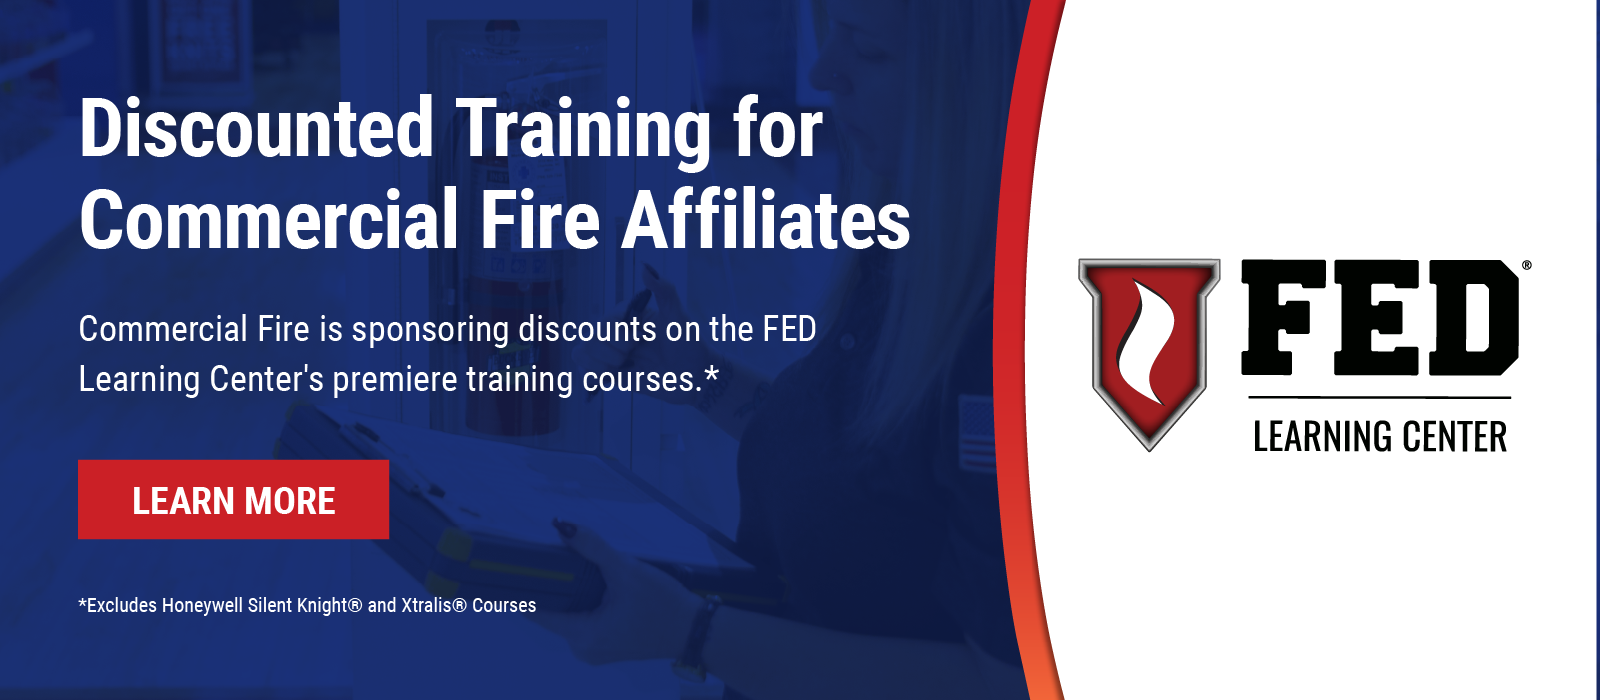 Discounted Training for CF Affiliates